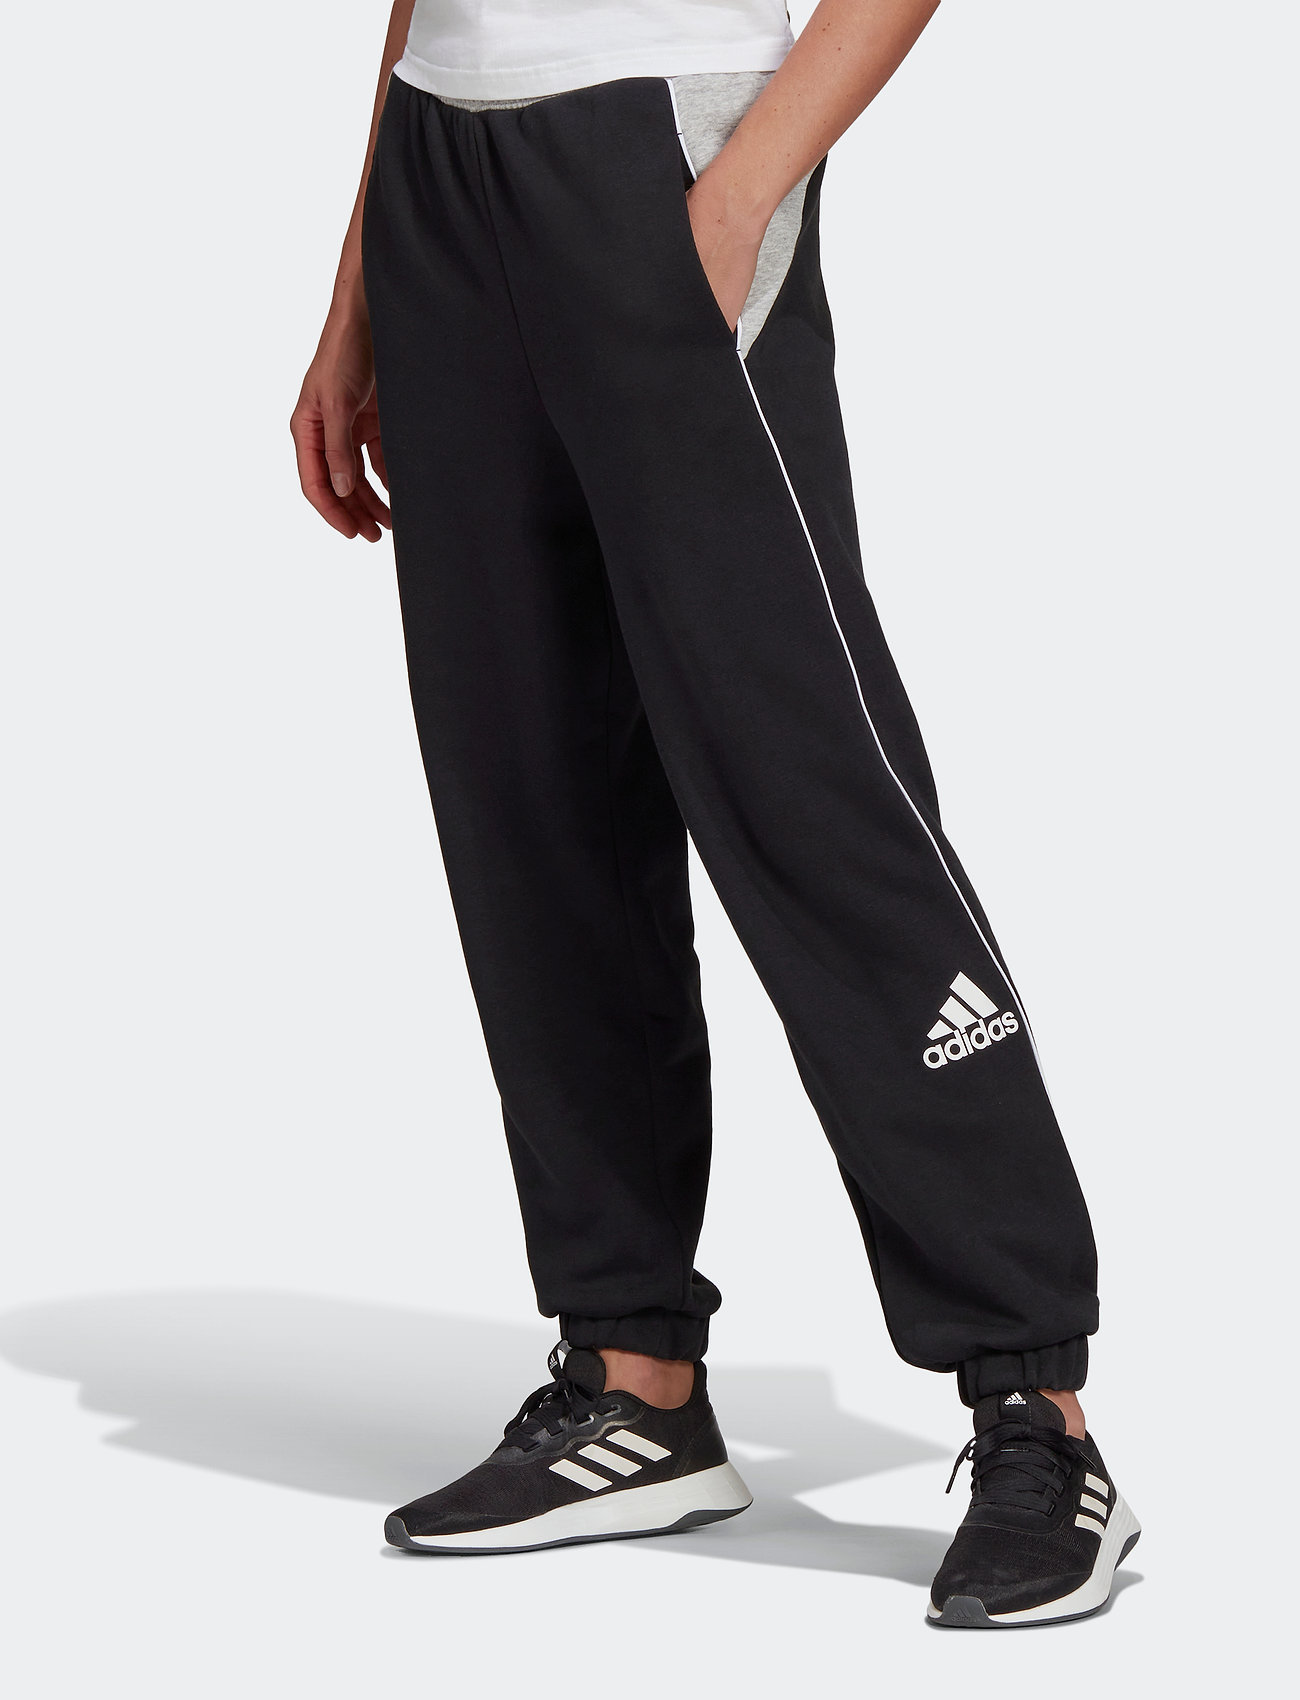 Top more than 93 adidas team issue tapered pants latest - in.eteachers